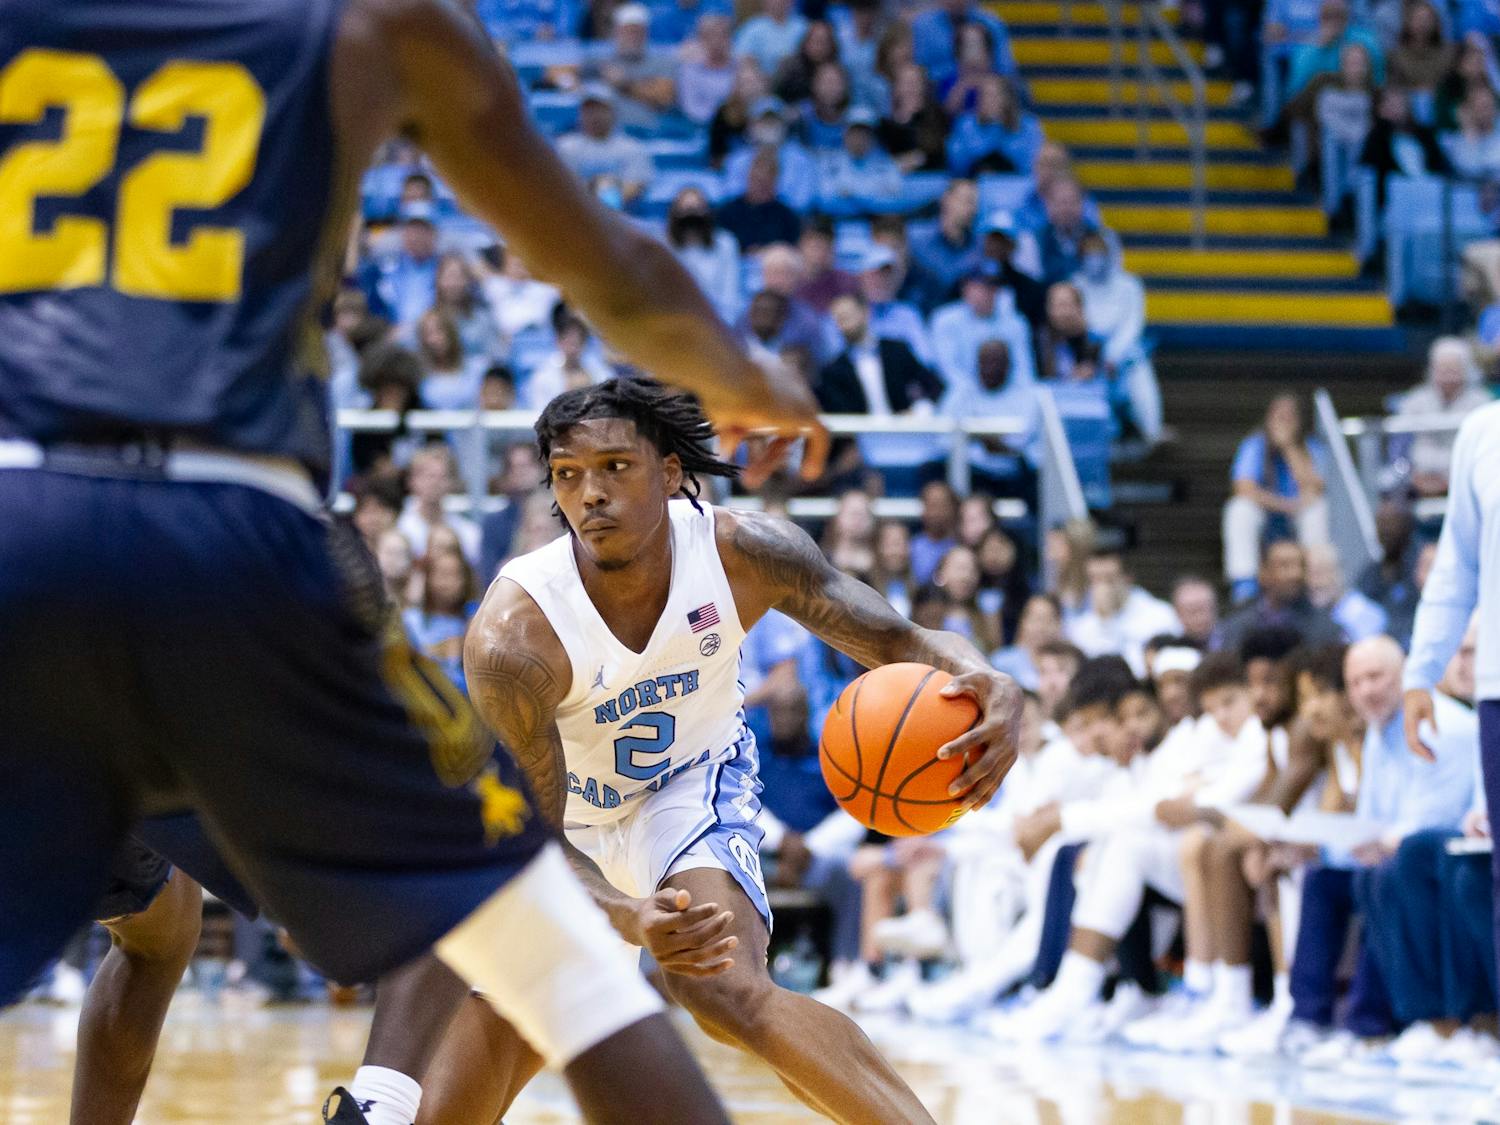 UNC junior guard Caleb Love (2) dribbles the ball during the basketball game against JCSU on Friday, Oct. 8, 2022.